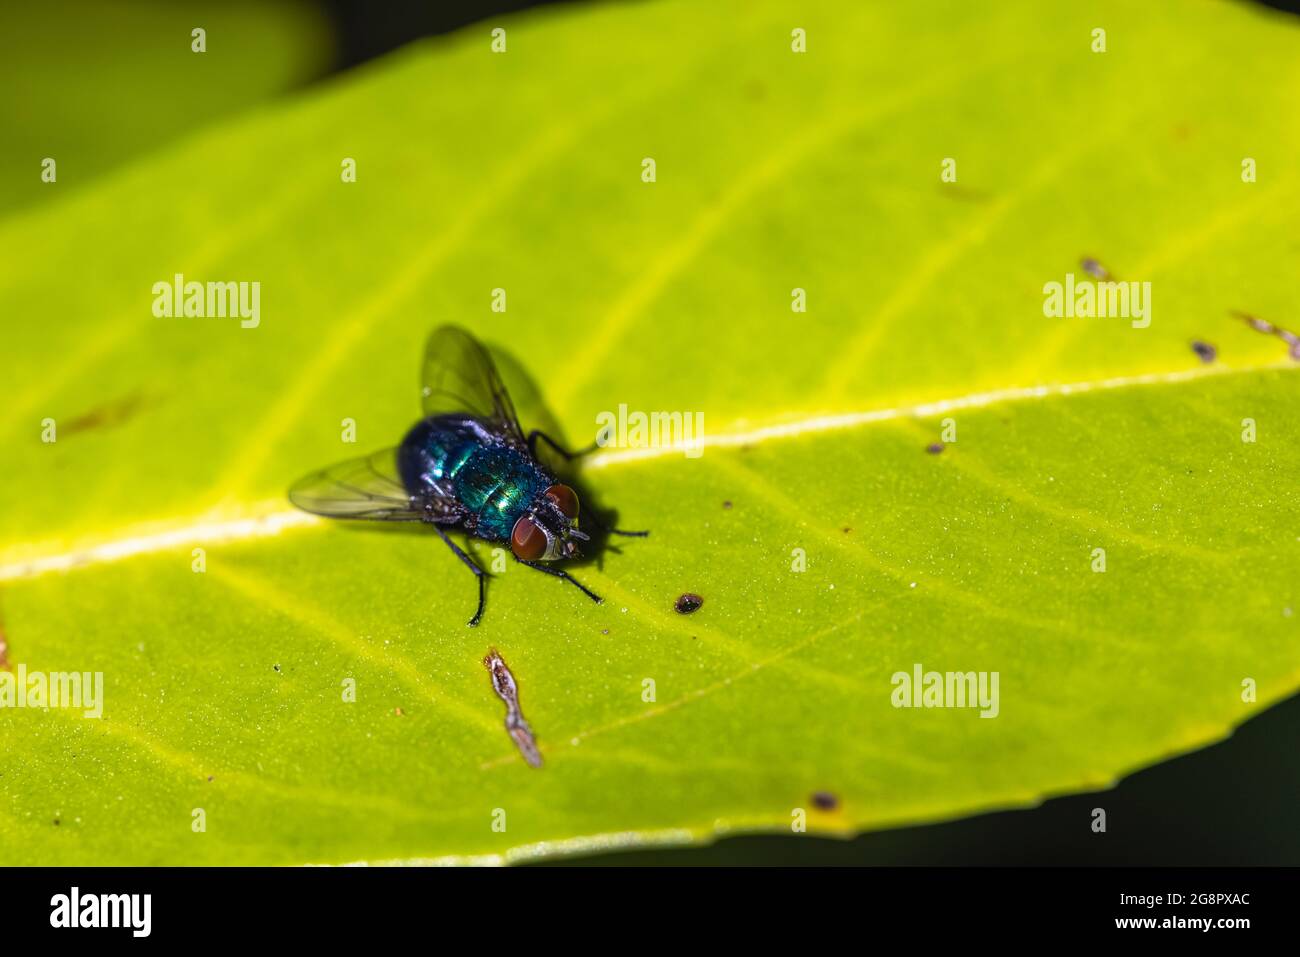 Close-up dorsal view of a common green bottle fly (Lucilia sericata), a common blowfly, landed on a green leaf in Surrey, south-east England Stock Photo